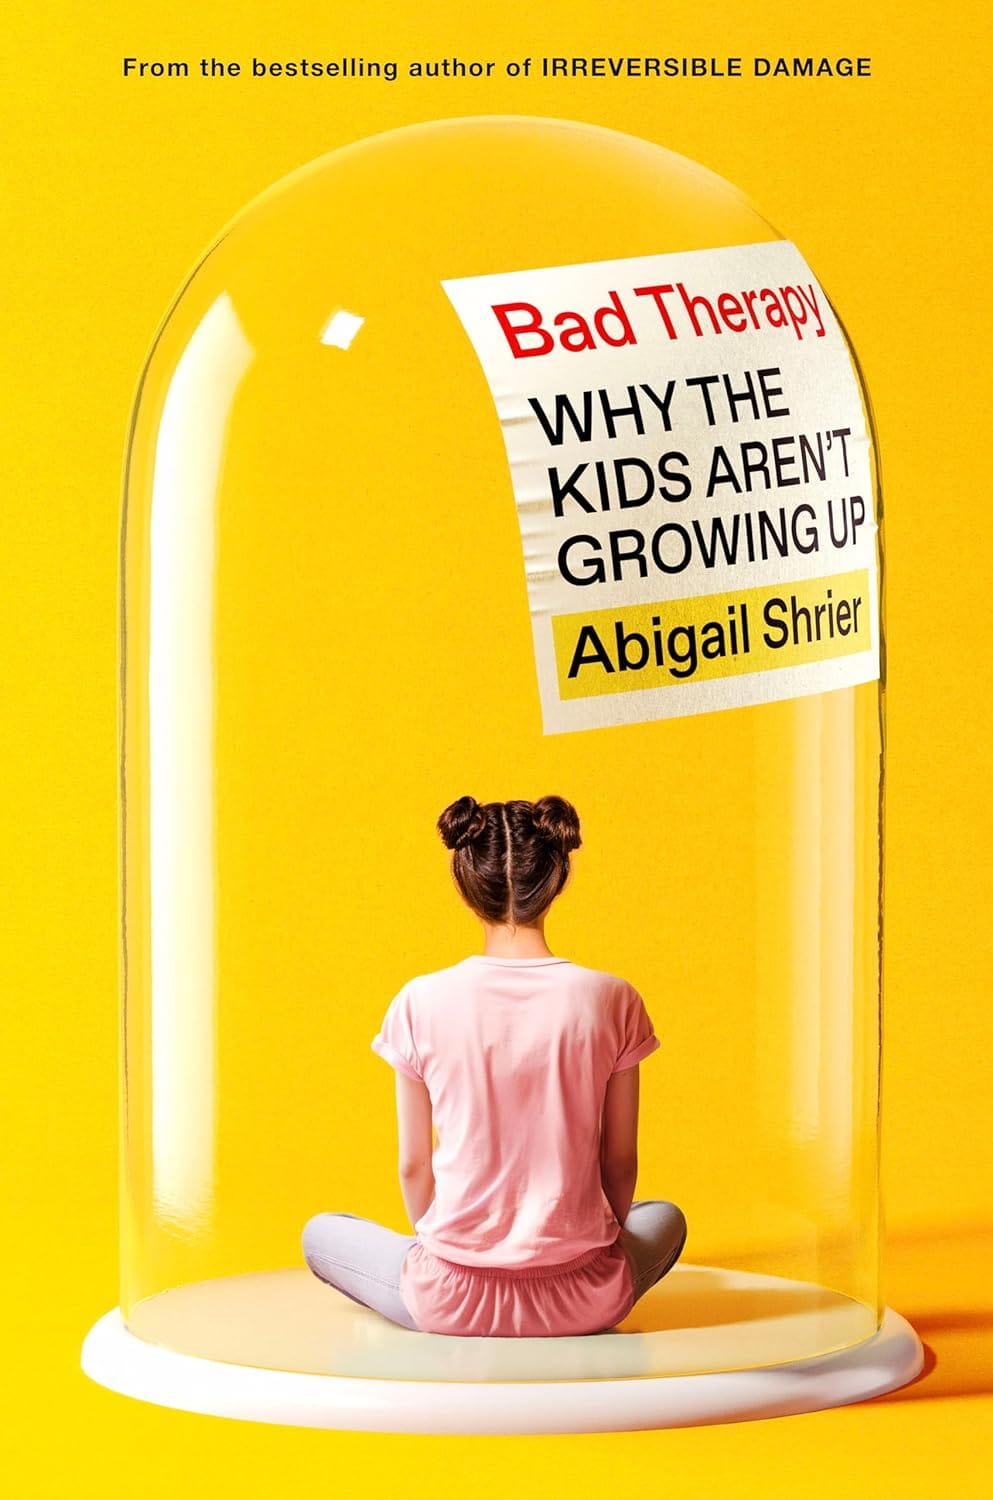 Chapter 2: Bad Therapy: Why the Kids Aren't Growing Up